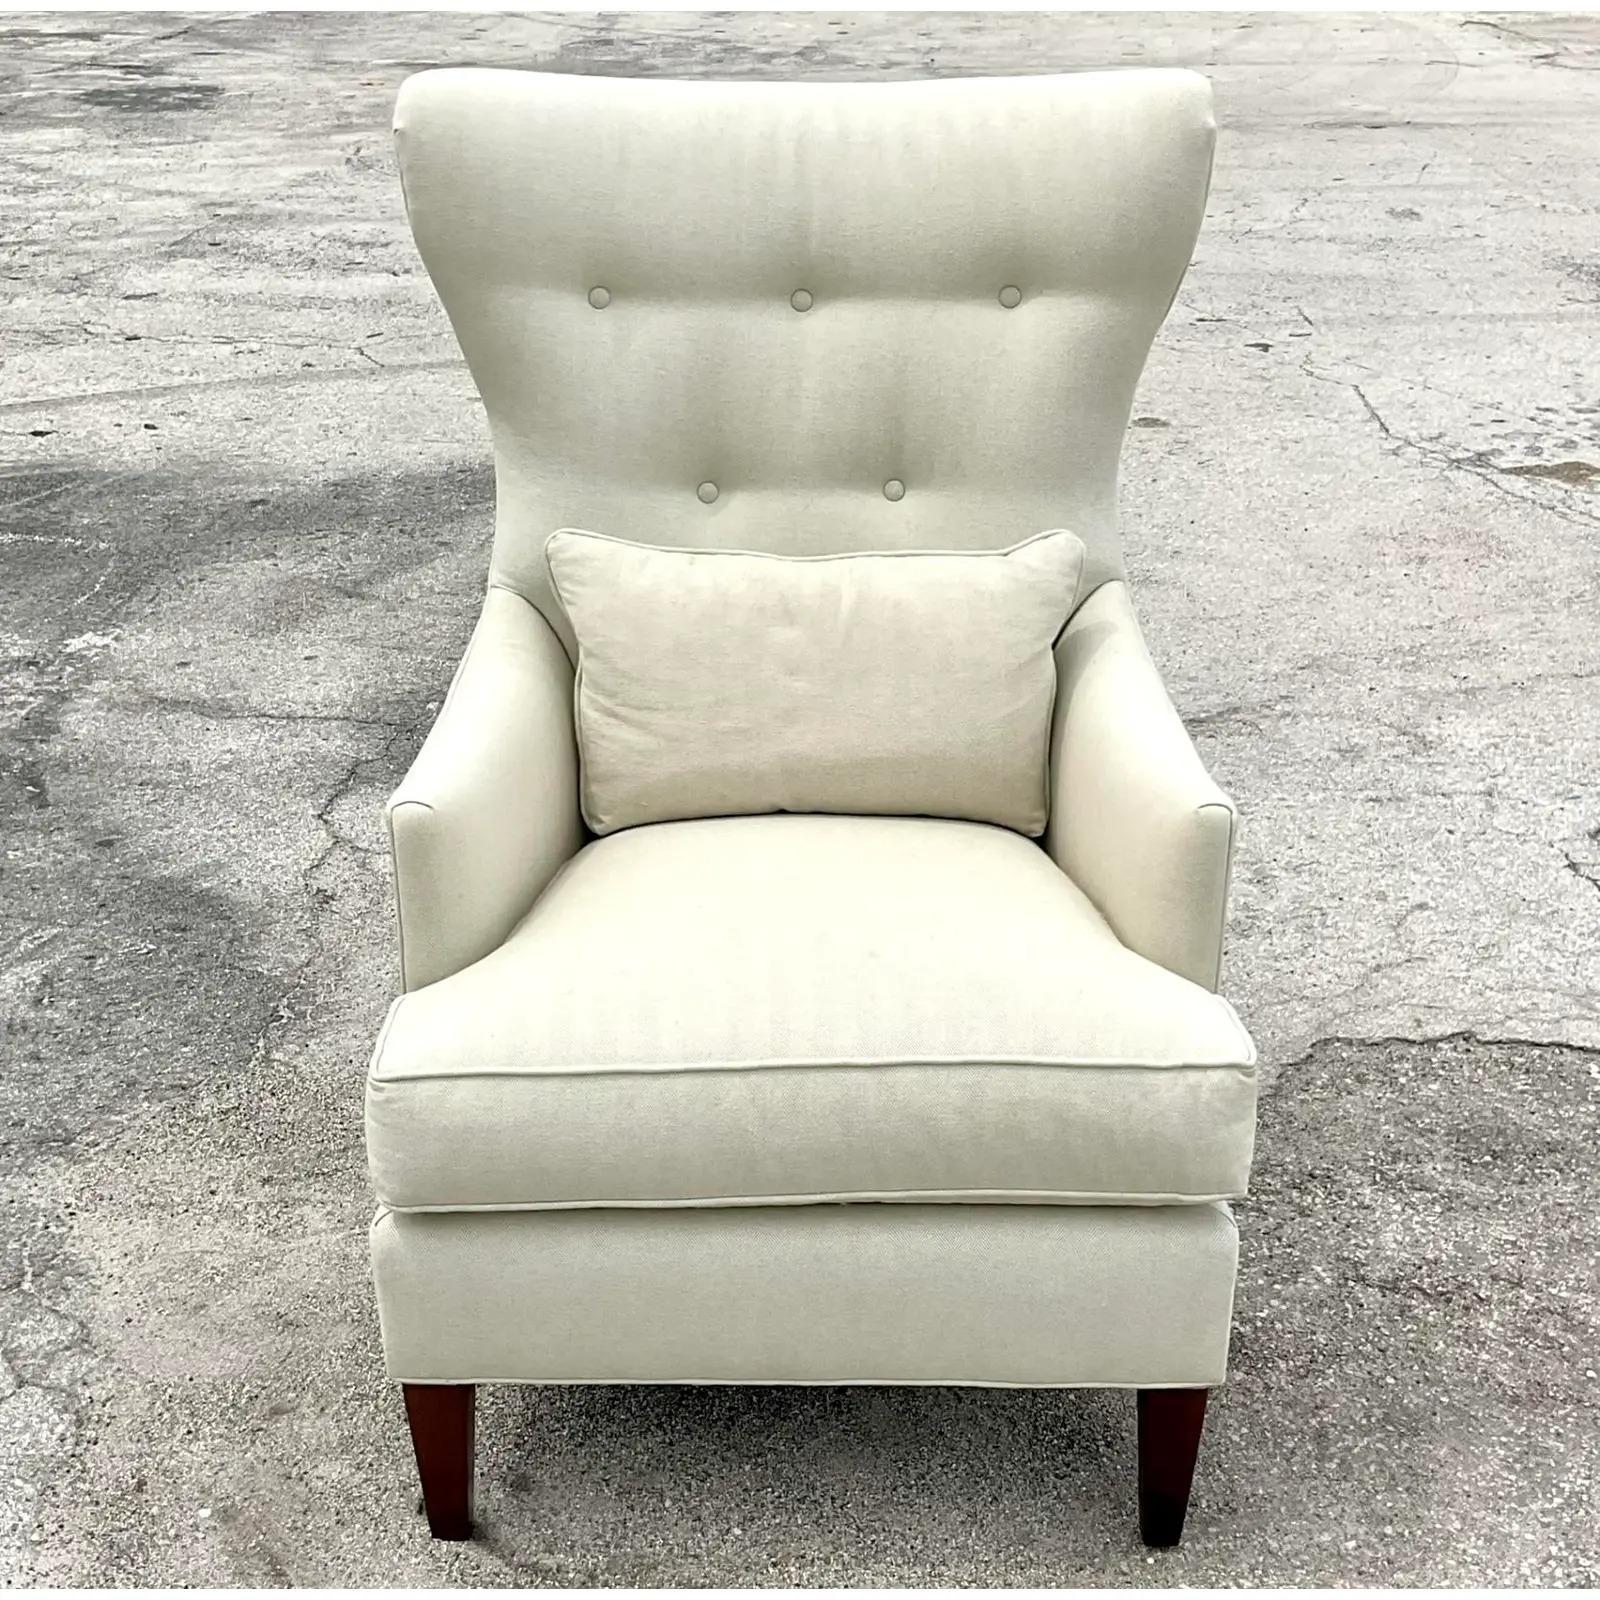 Fantastic vintage Contemporary wingback chair. A chic Contemporary take on a classic shape. Made by the Huntington House group in North Carolina. Beautiful felted Calvary twill upholstery. Acquired from a Palm Beach estate.